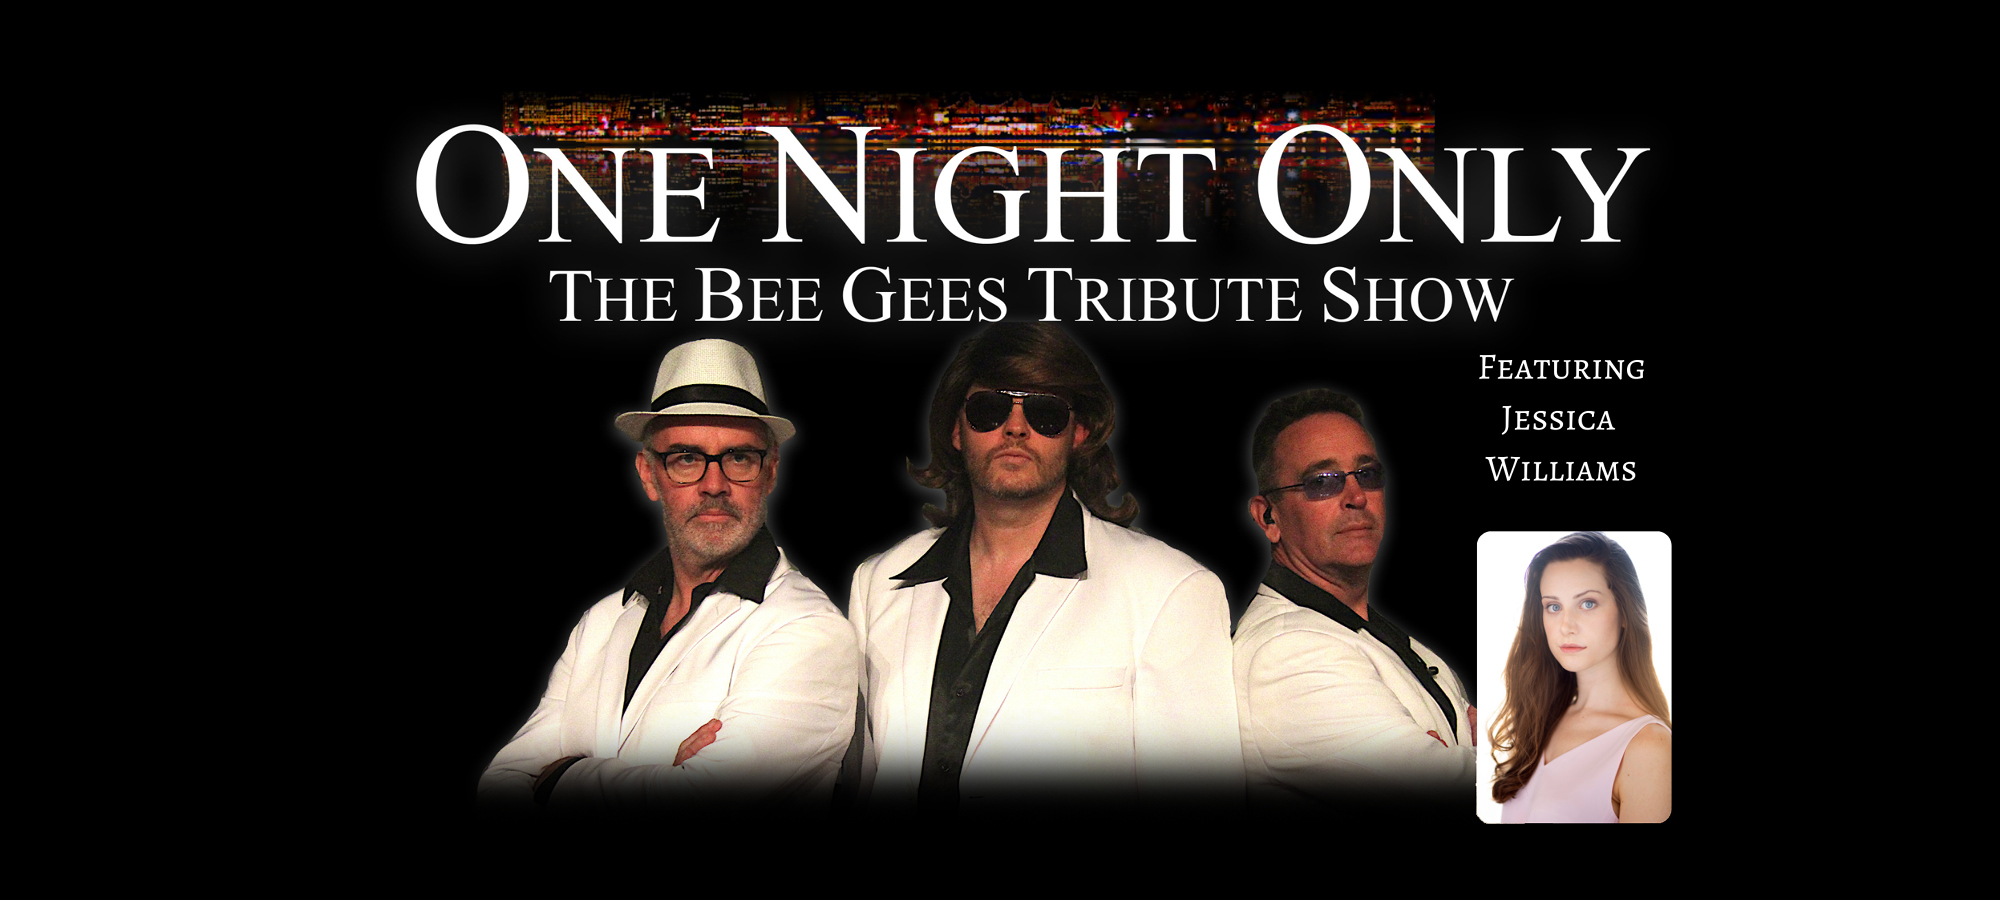 One Night Only – The Bee Gees Tribute Show